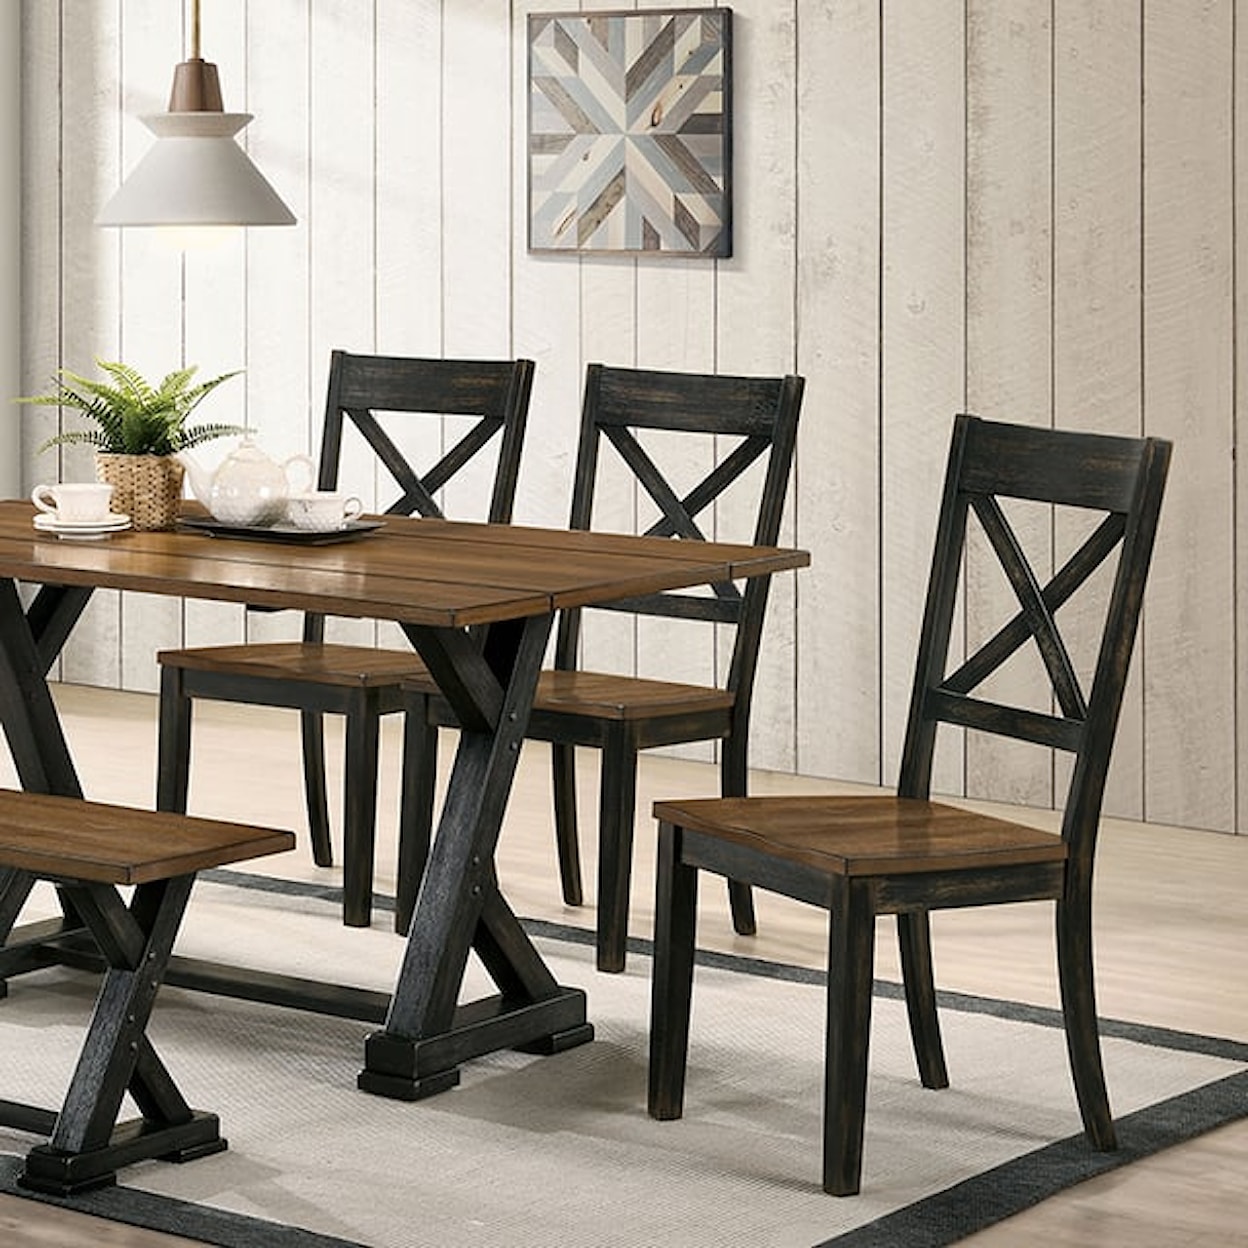 Furniture of America - FOA Yensley Dining Table with Trestle Base